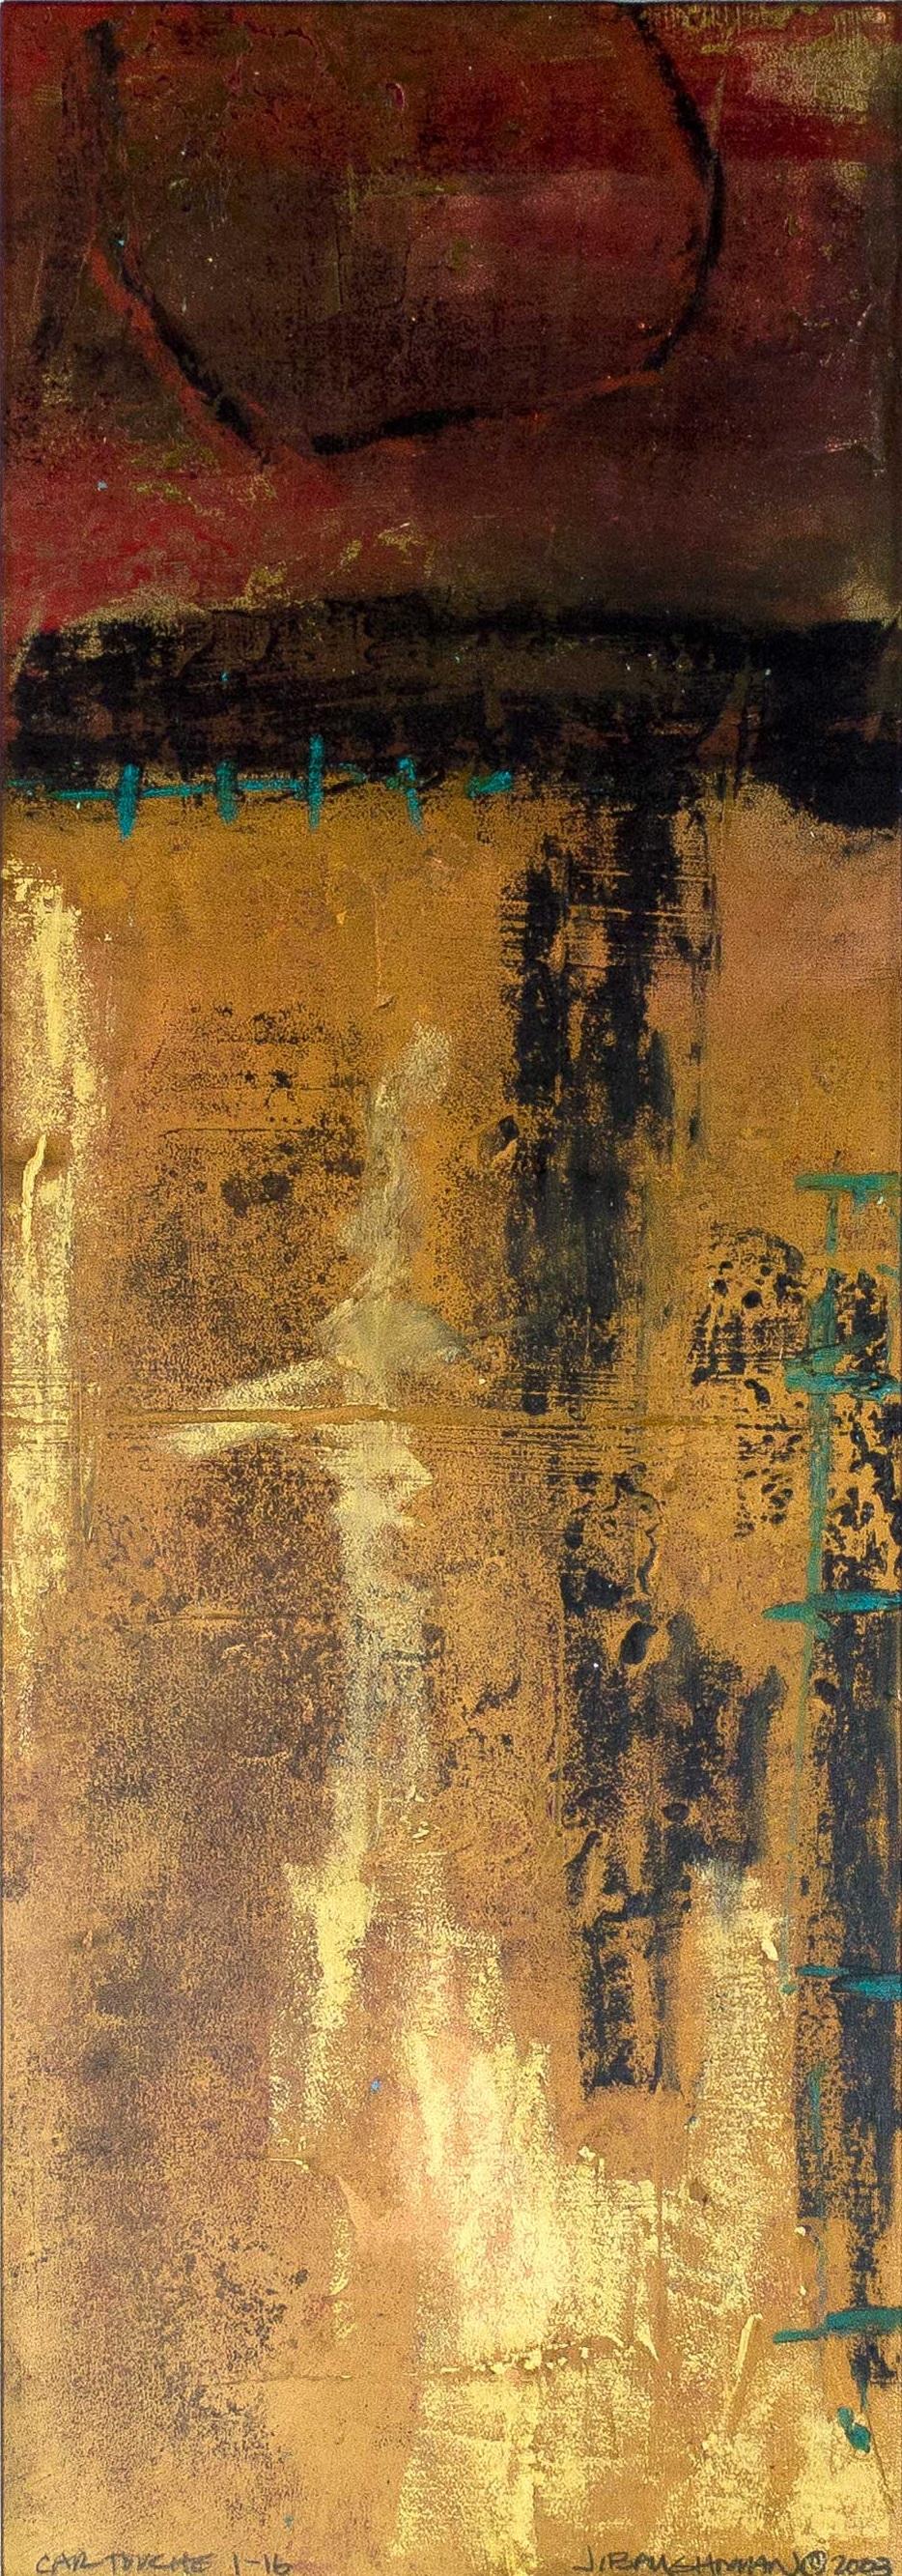 'Cartouche 1-16' Mixed Media, Signed & Dated by Artist - Painting by John Baughman